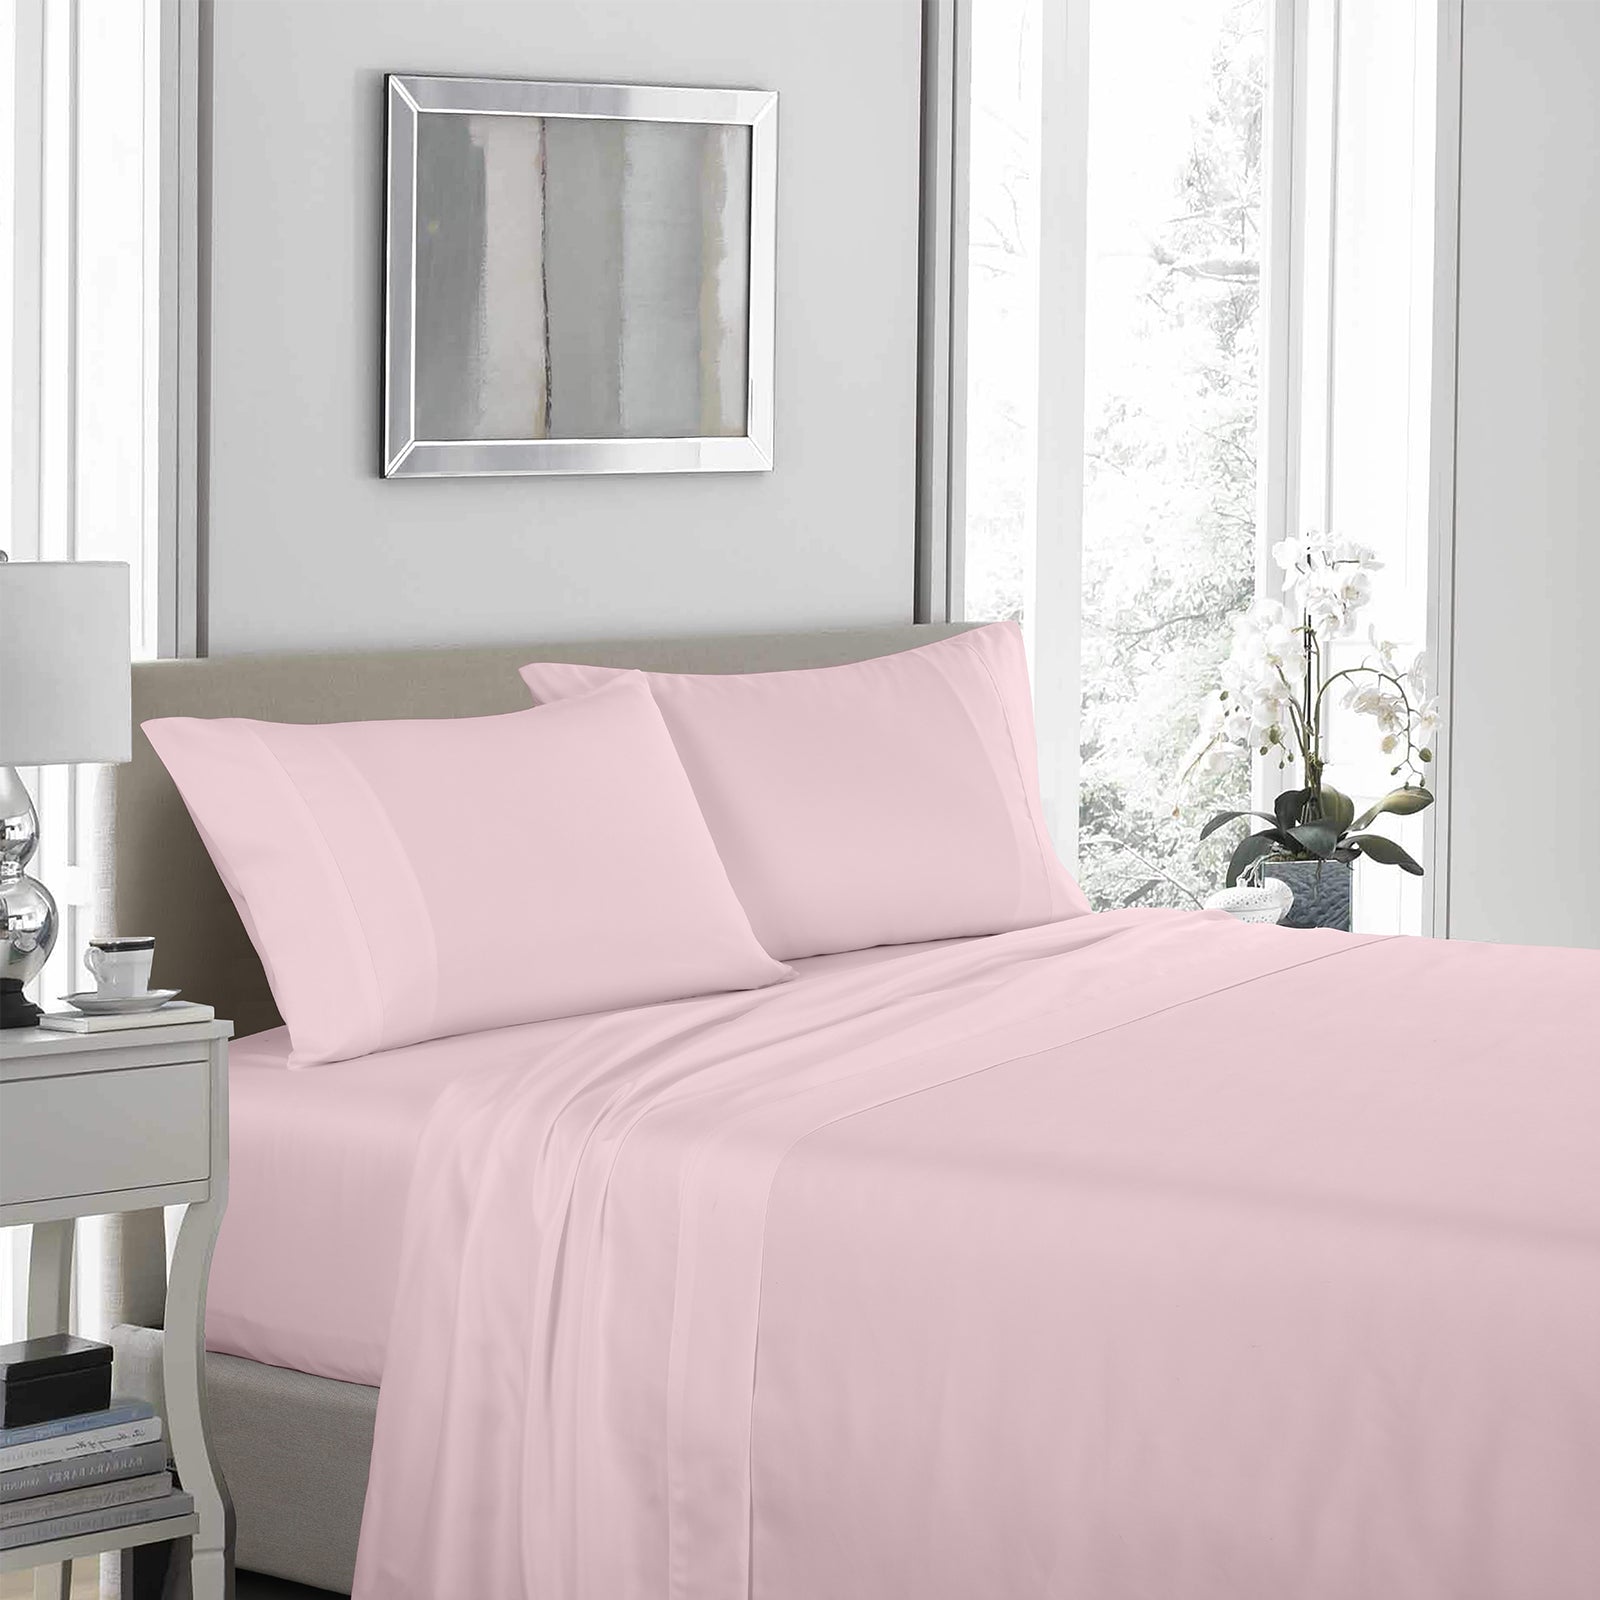 Royal Comfort 1200 Thread Count Sheet Set 4 Piece Ultra Soft Satin Weave Finish-Bed Linen-PEROZ Accessories